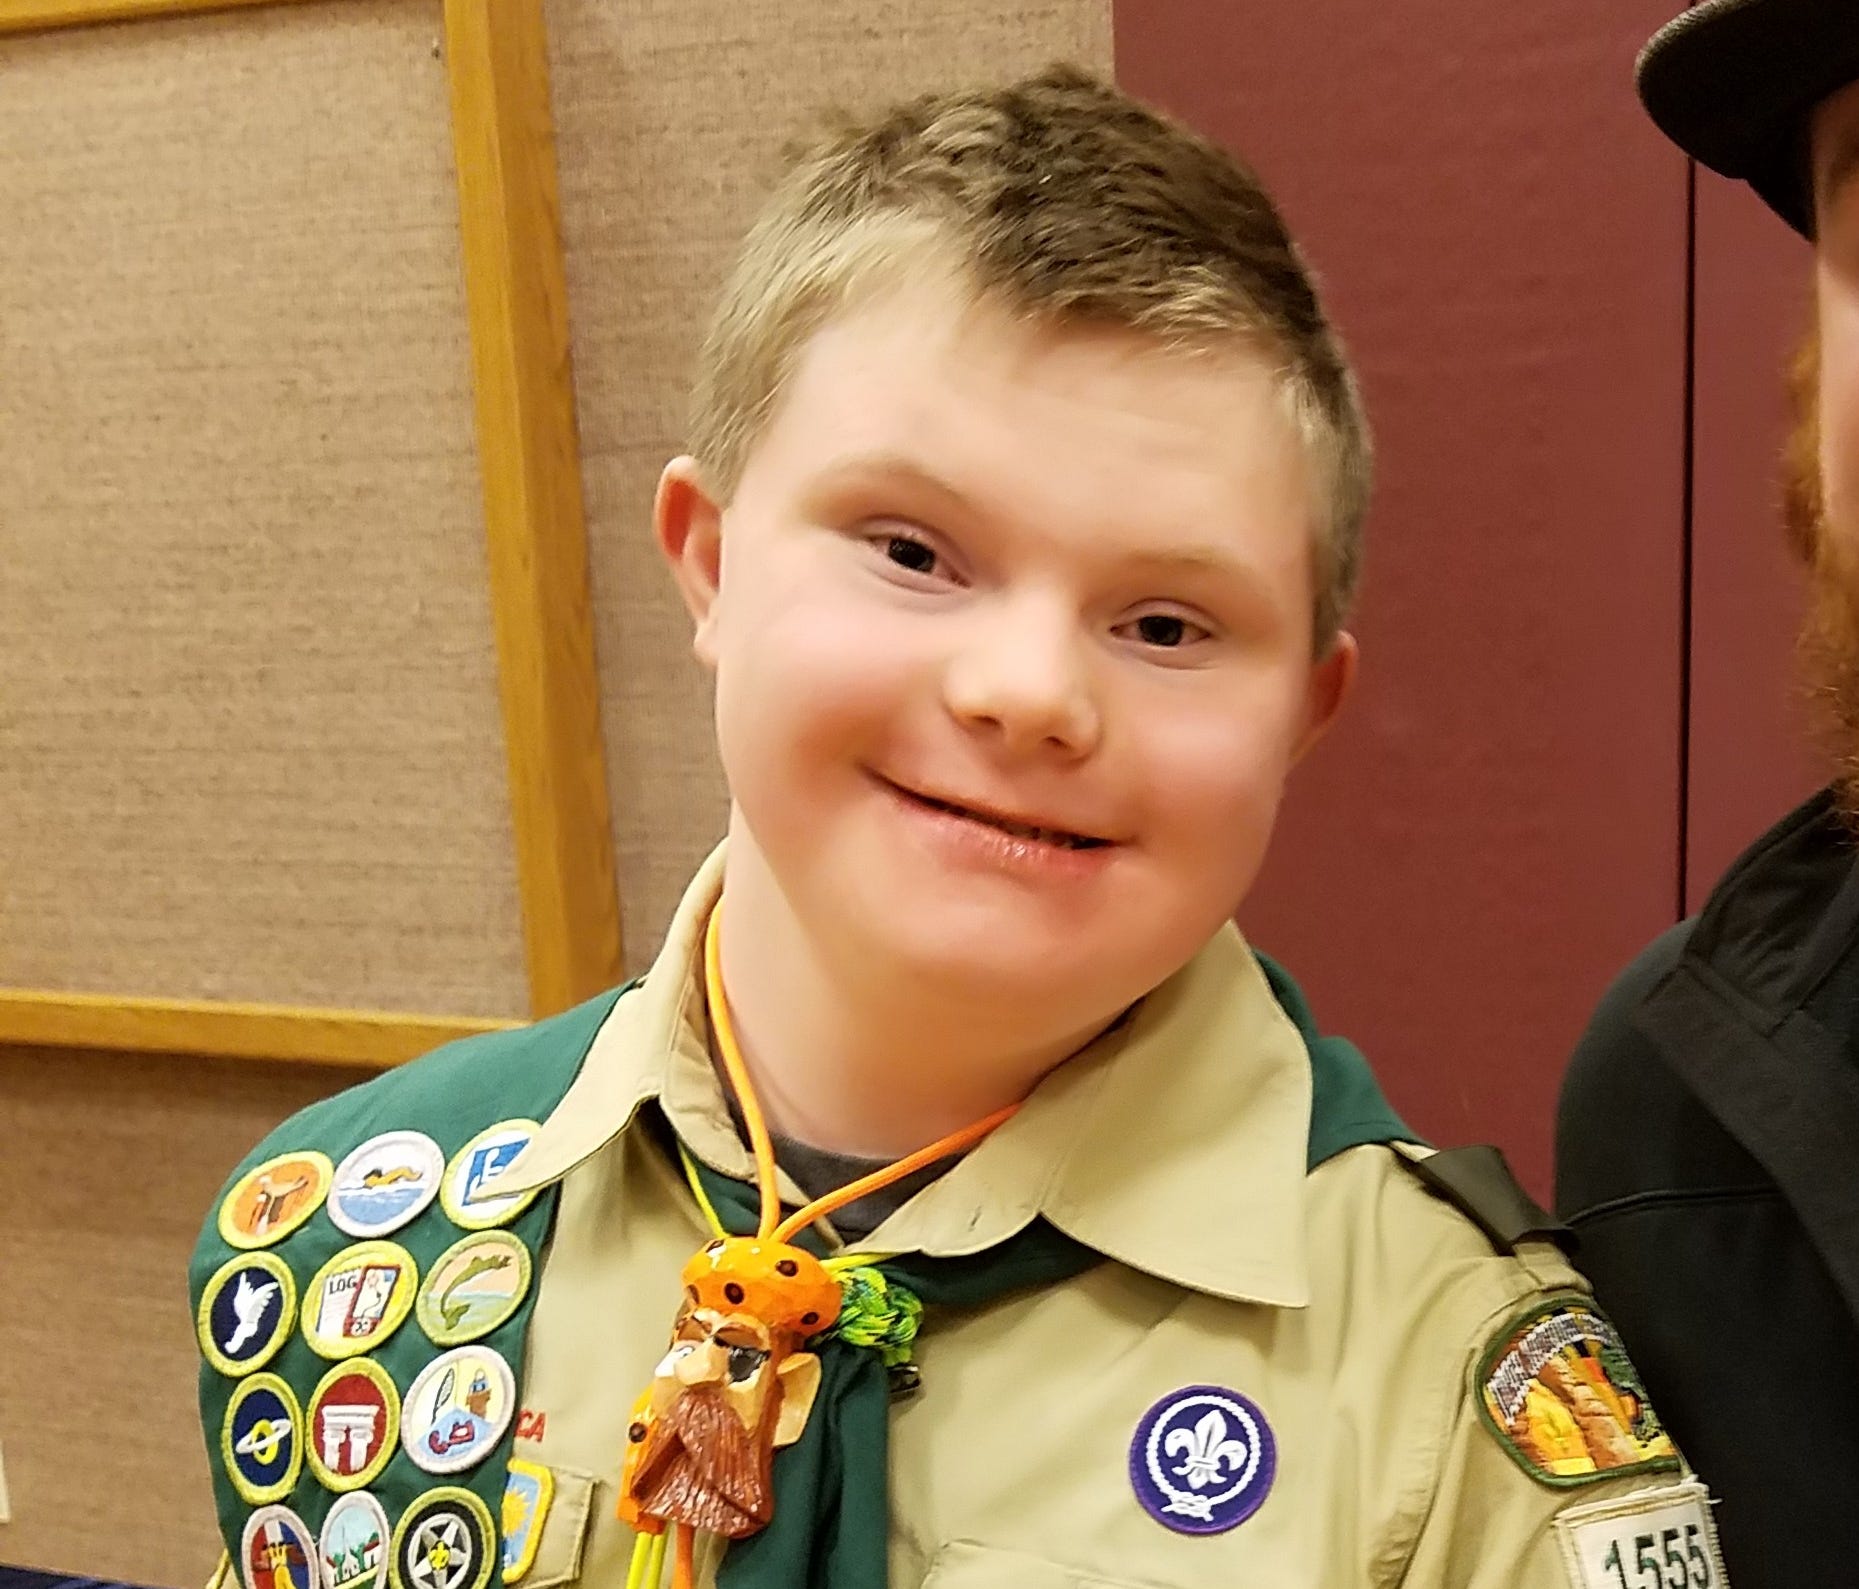 Logan Blythe, a Utah boy with Down syndrome, was told he could not complete his Eagle Project. Now, his father is suing the Boy Scouts of America for discrimination.